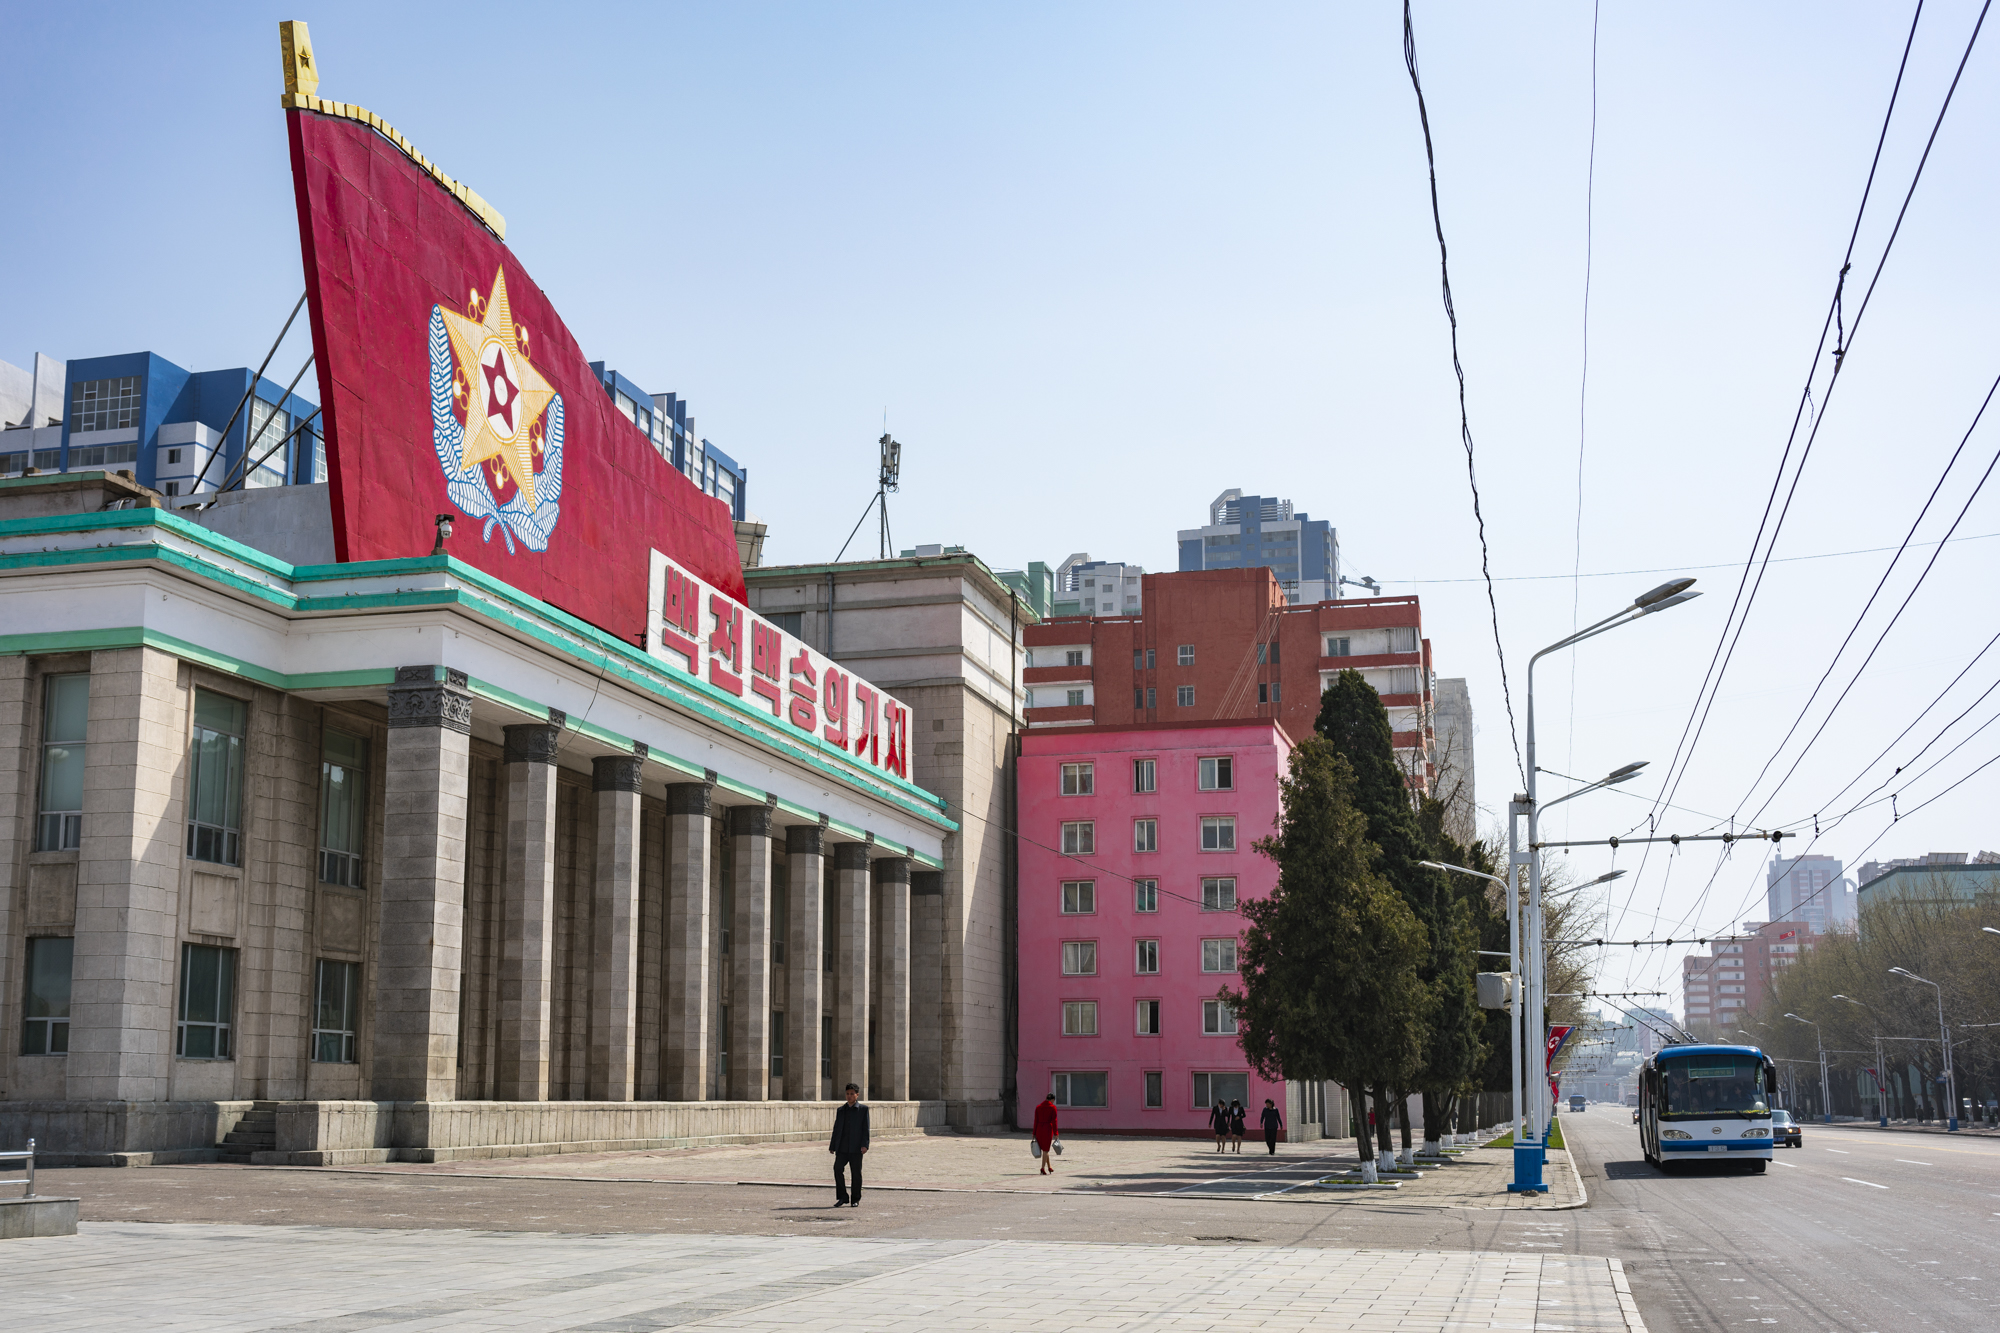  Building topped by revolutionary decoration, across from Kim Il Sung Square.  